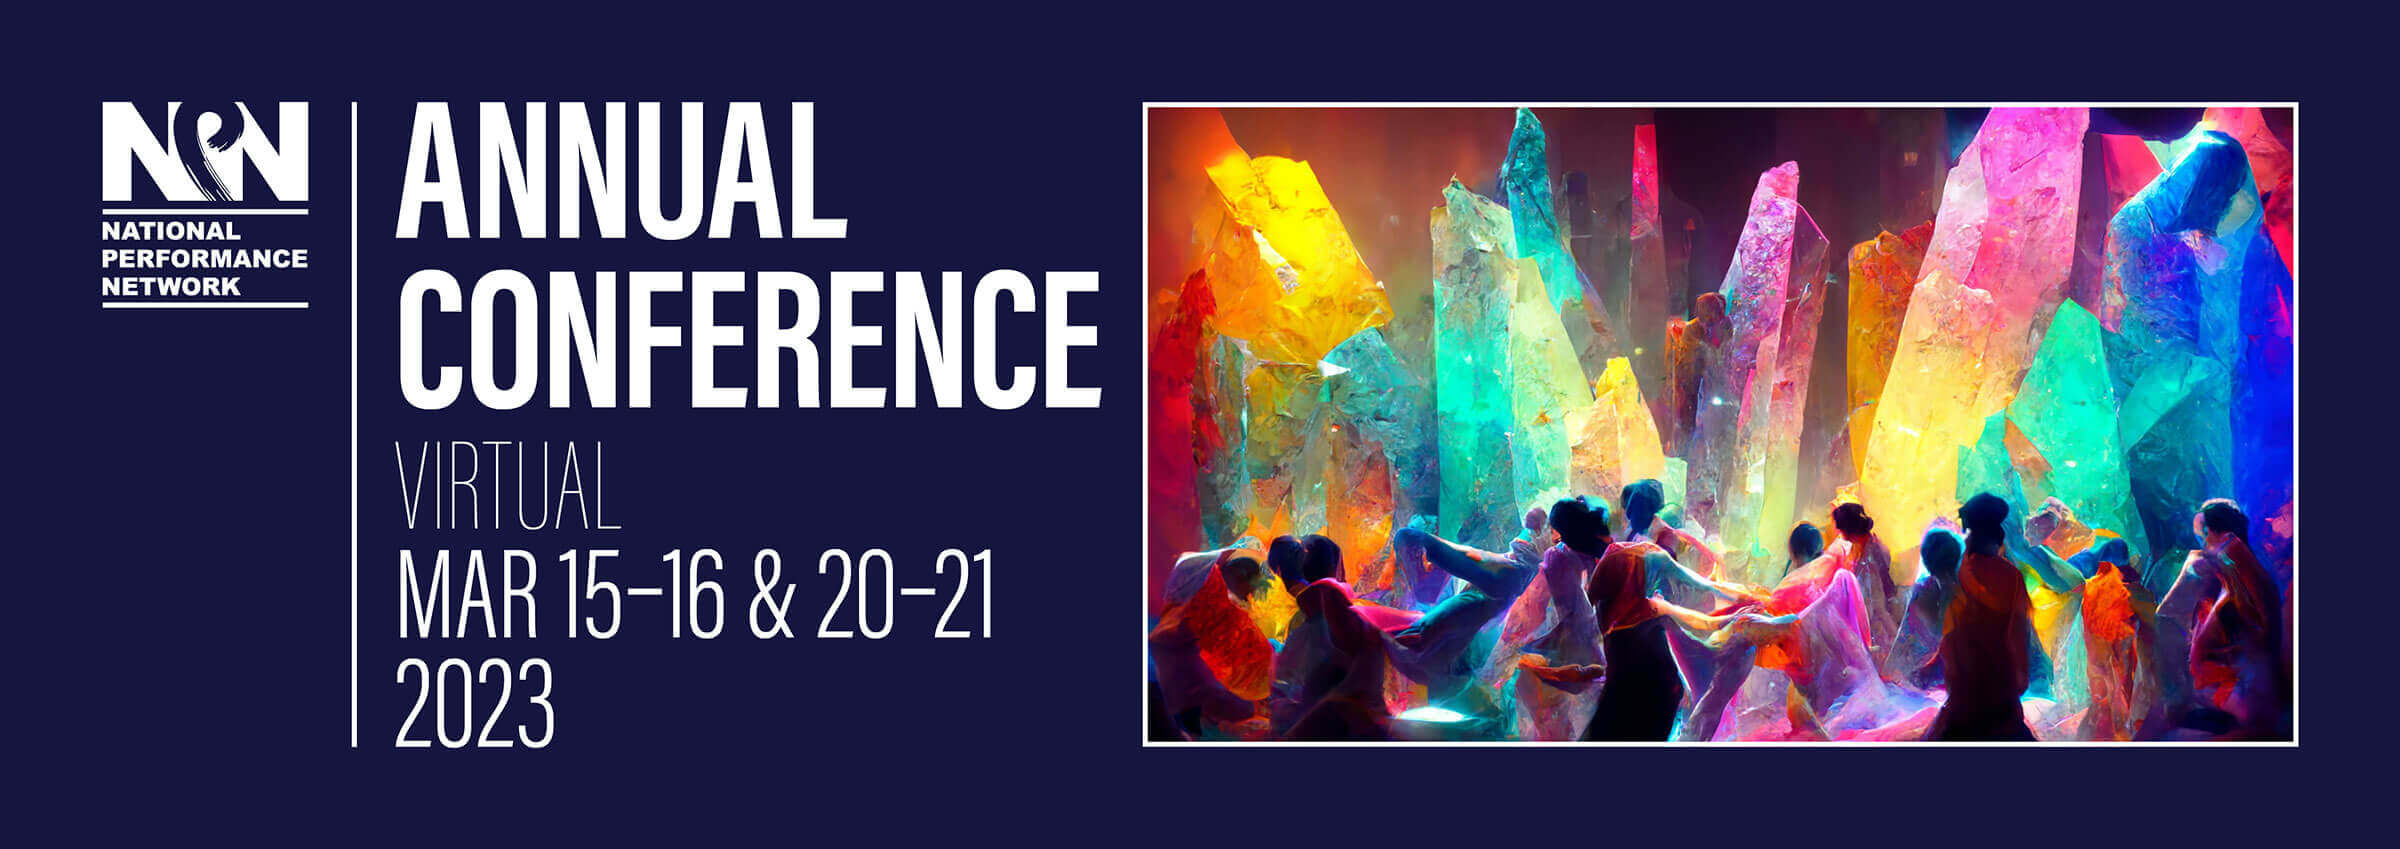 Text: NPN Annual Conference, Virtual, March 15-16 & 20-21, 2023 next to an image: A colorful illustration in a semiabstract style shows a group of people in movement or dancing. Behind and above them tower giant crystals cast prismatically in many colors. The image suggests a joyful, colorful burst of light and happiness.